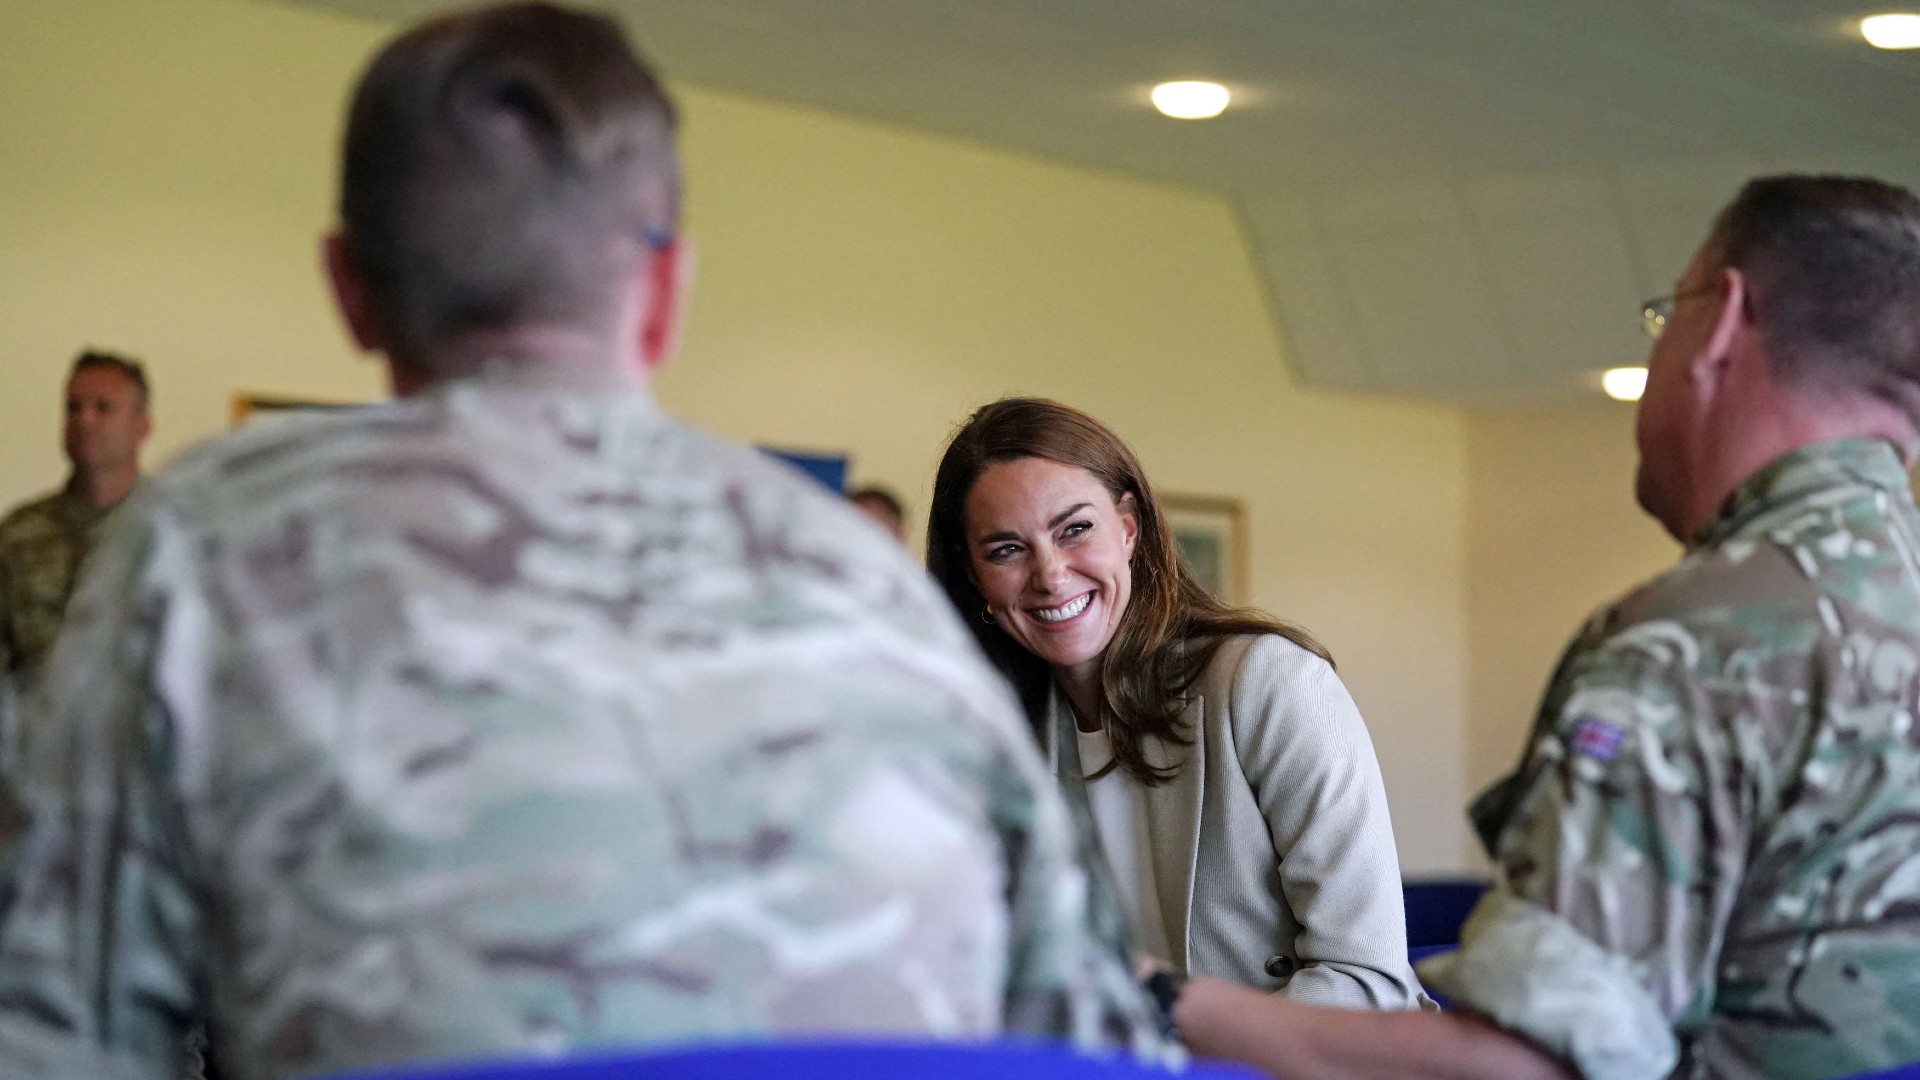 A British Army Regiment Wants Kate Middleton to Take Over as Colonel from Prince Andrew